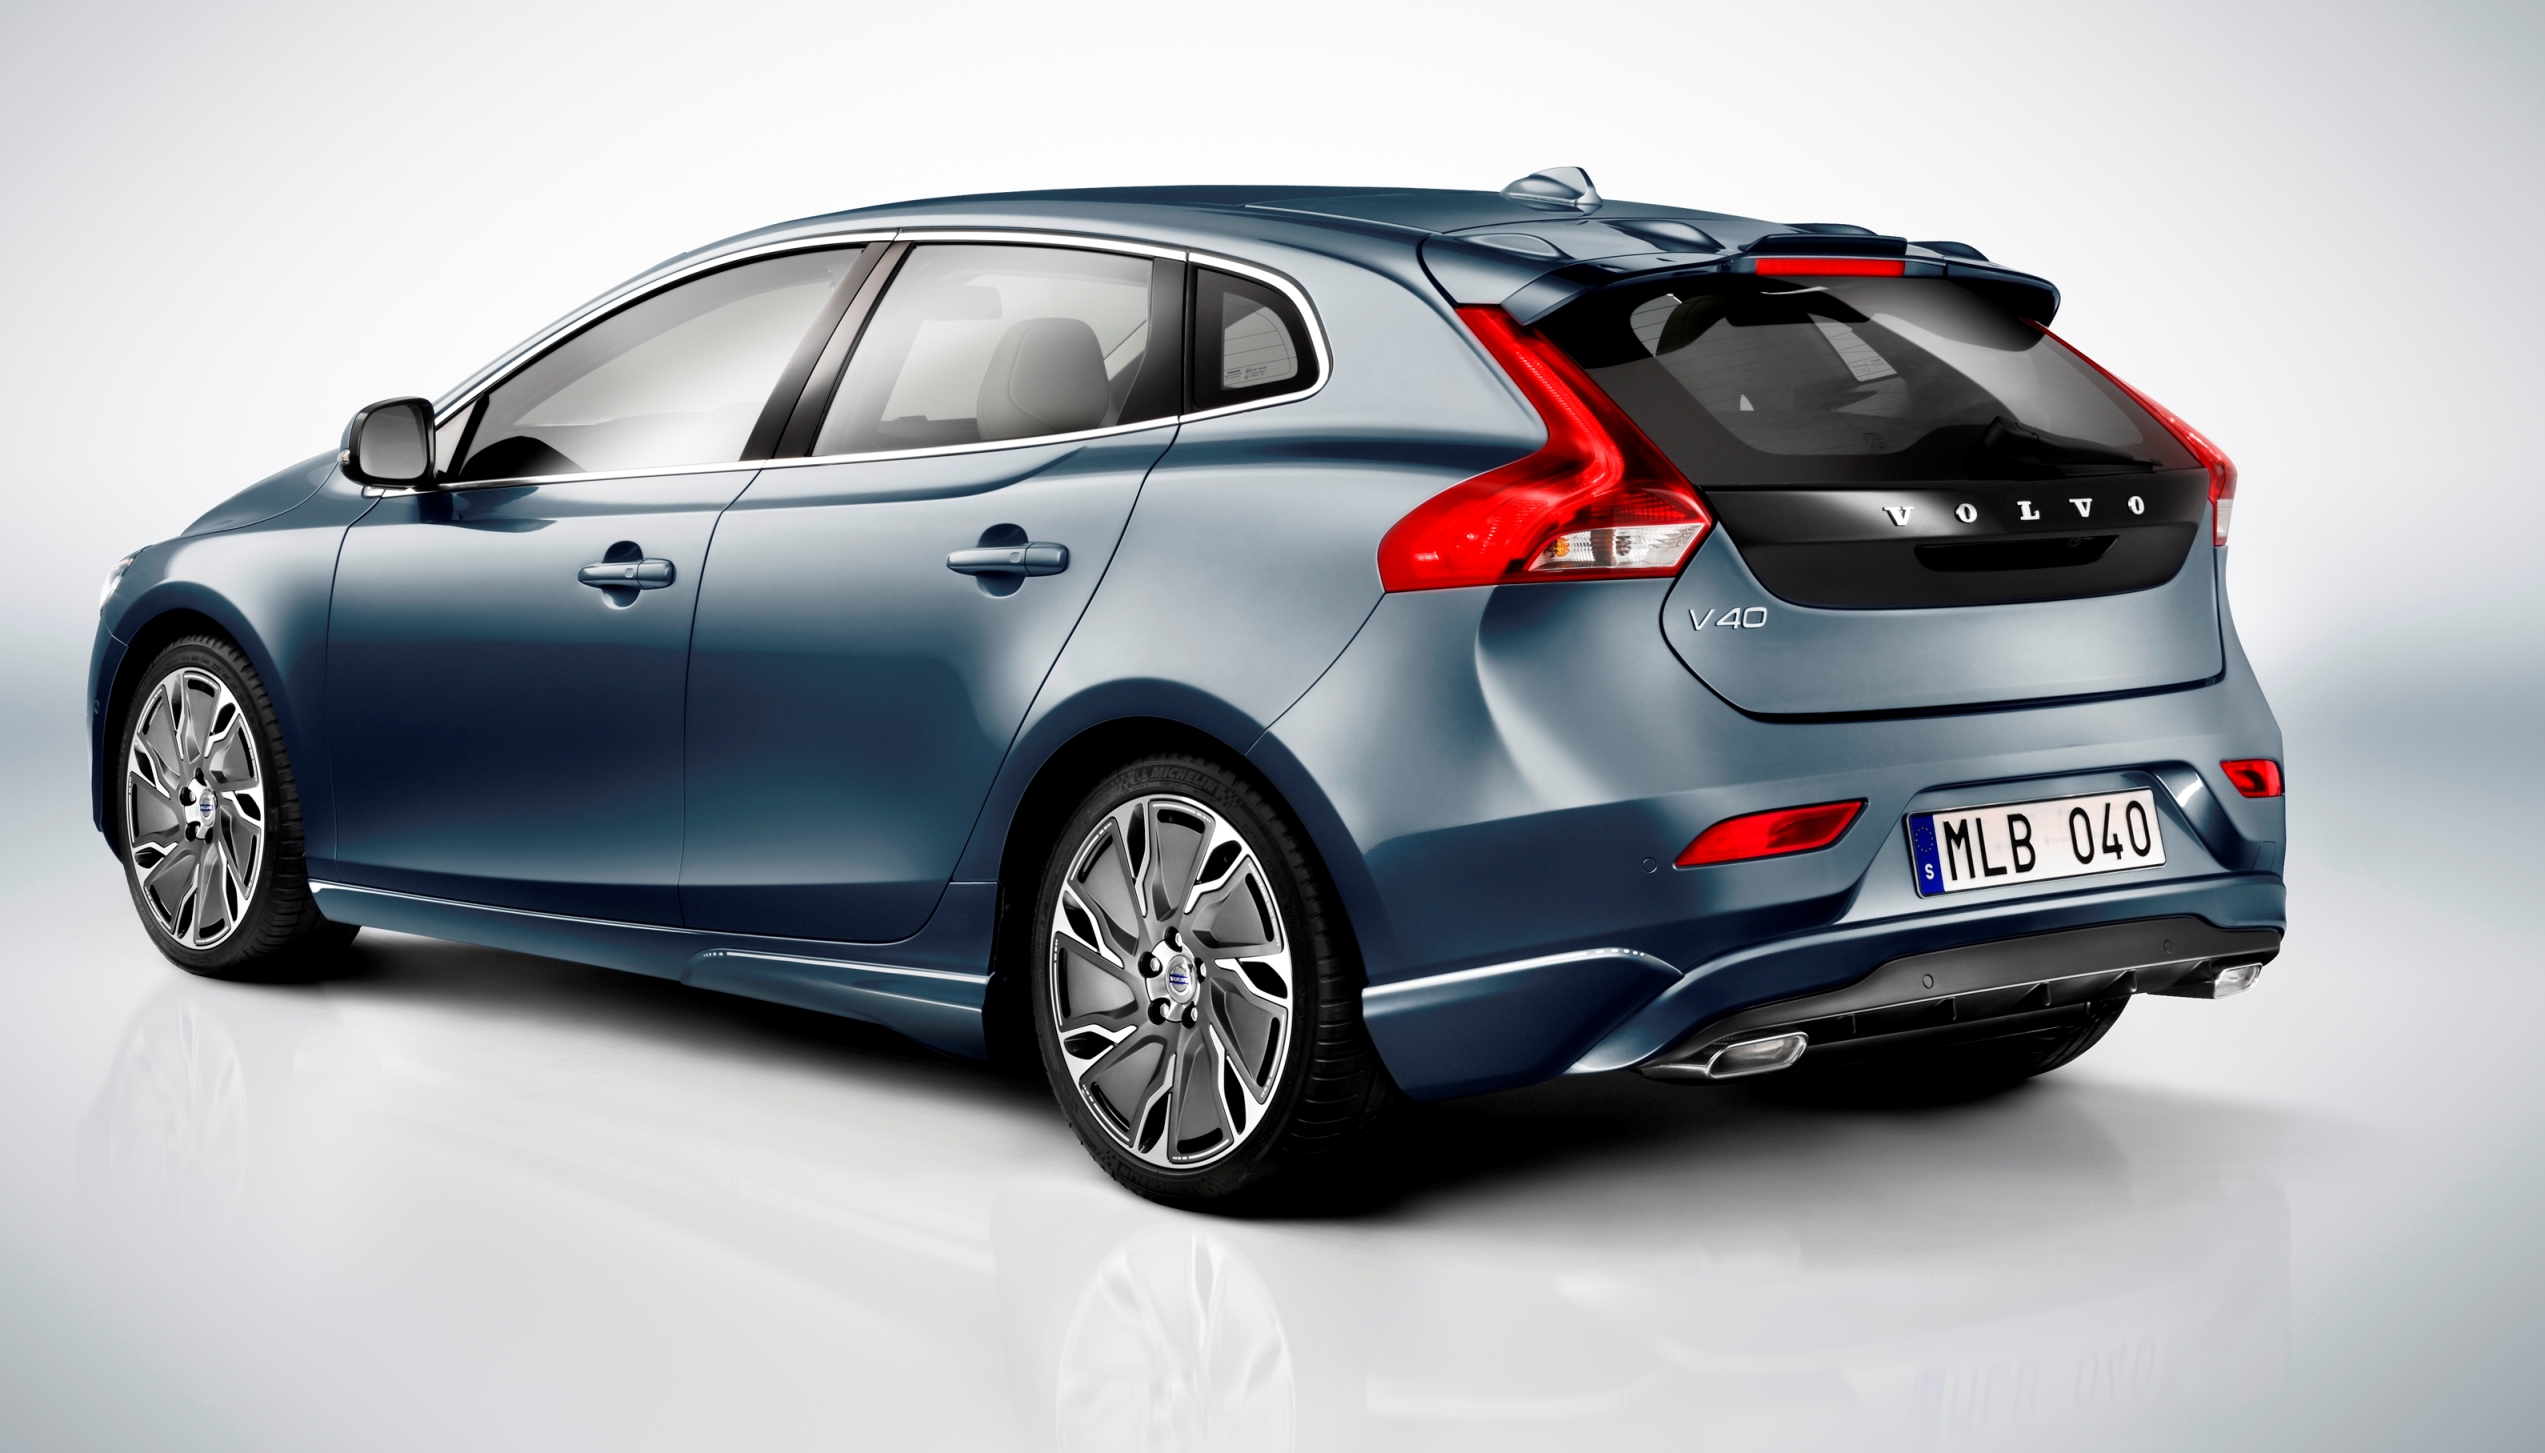 the Volvo V40 announces a consumption of 3.6l/100km for emissions of